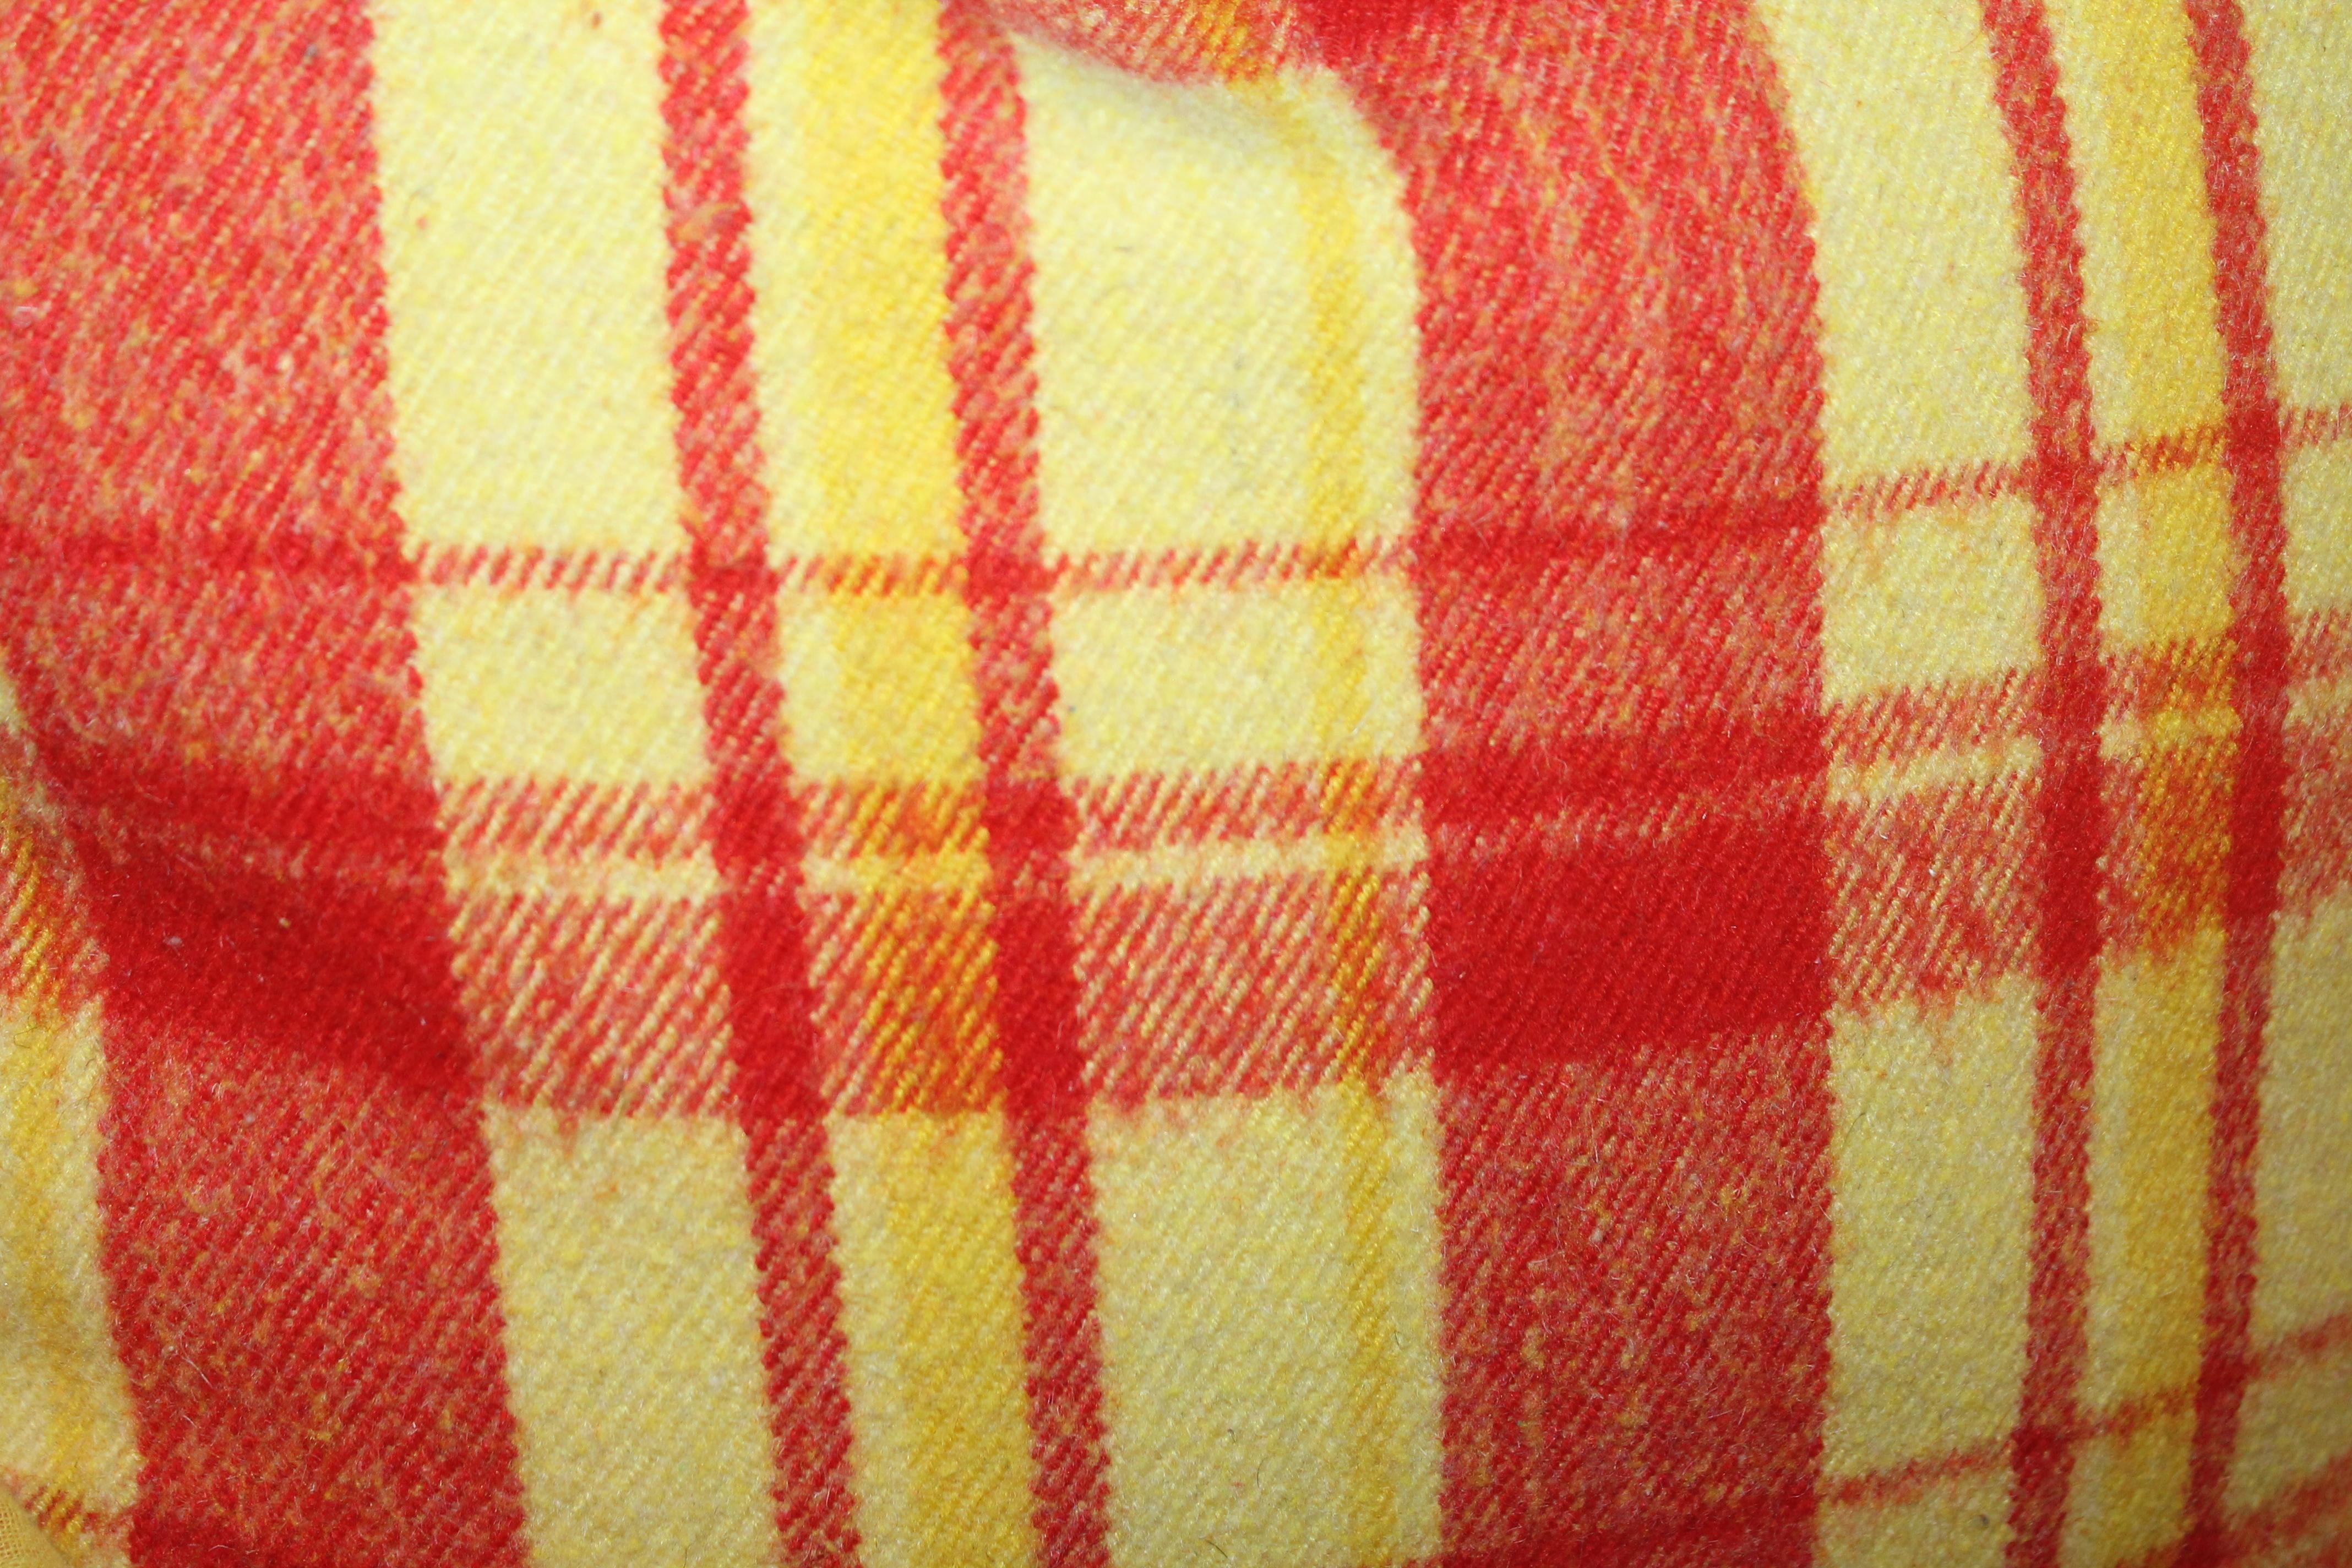 Plaid Wool Blanket Pillows, Pair In Good Condition For Sale In Los Angeles, CA